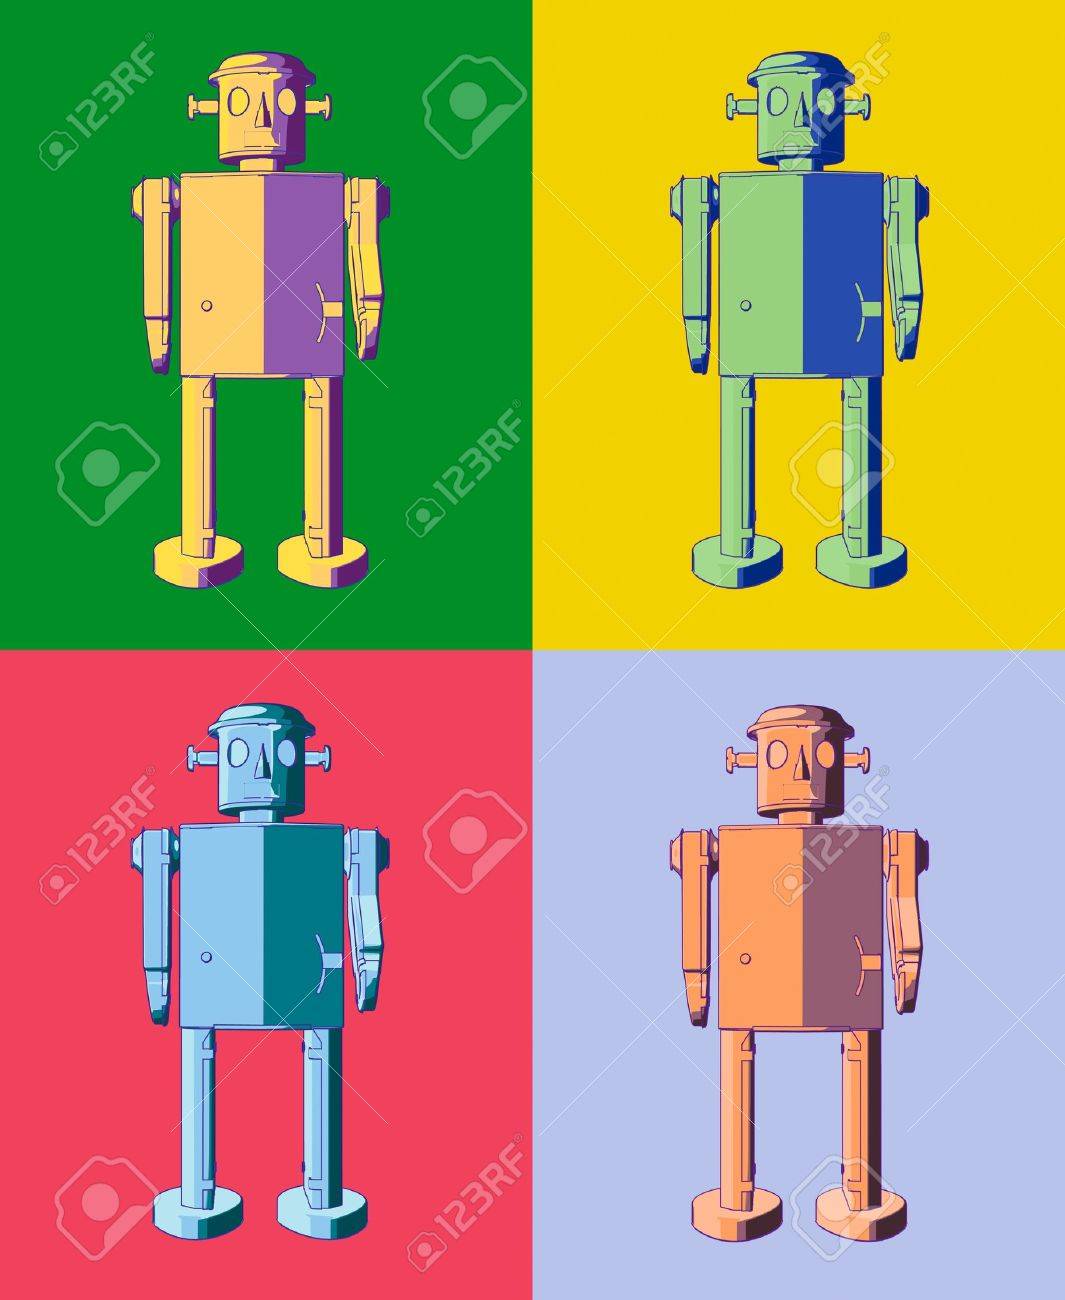 Warhol Style Illustration Of Four Tin Toy Robots Each On